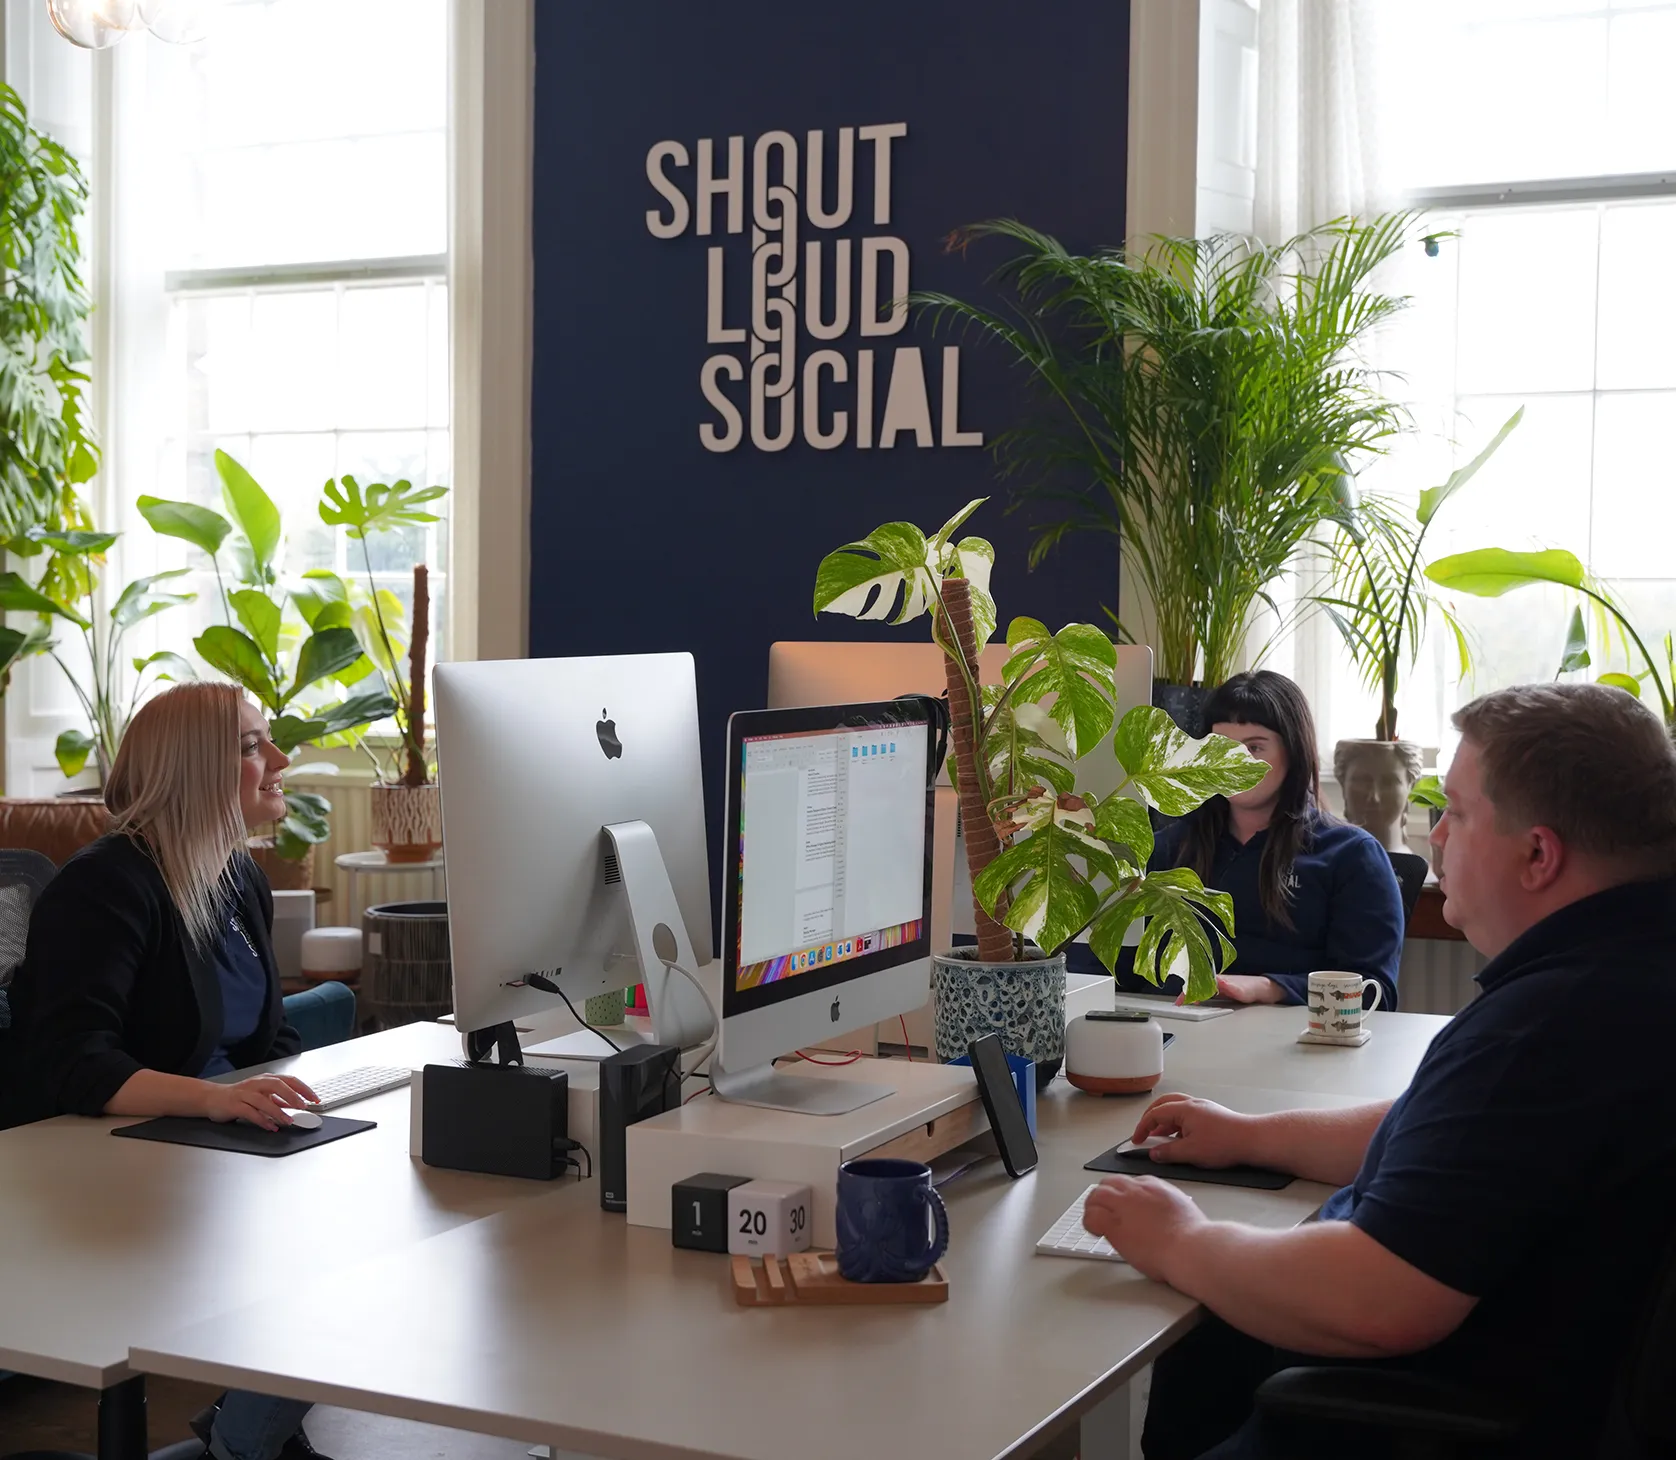 The shout loud social team working at their desks.